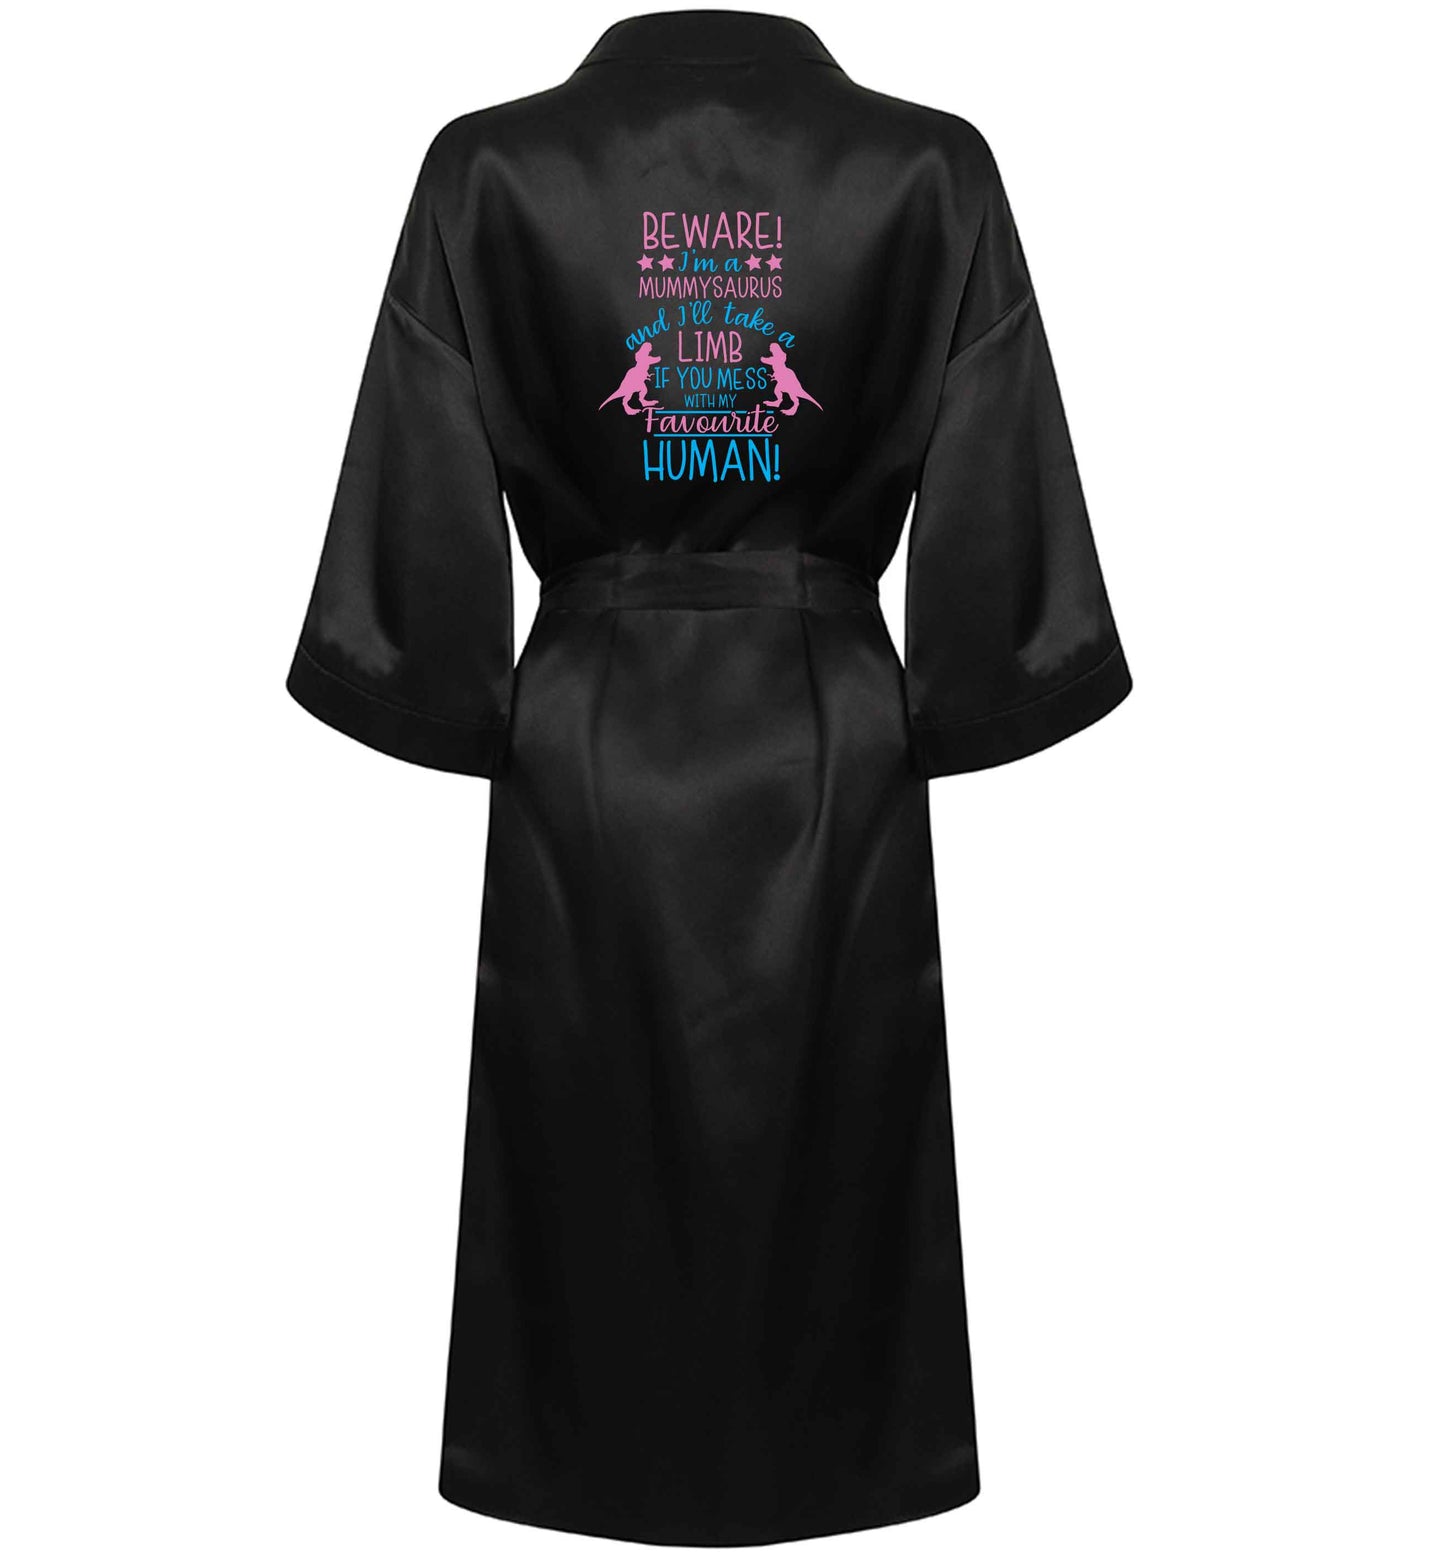 Perfect gift for any protective mummysaurus! Beware I'm a mummysaurus and I'll take a limb if you mess with my favourite human XL/XXL black ladies dressing  gown size 16/18